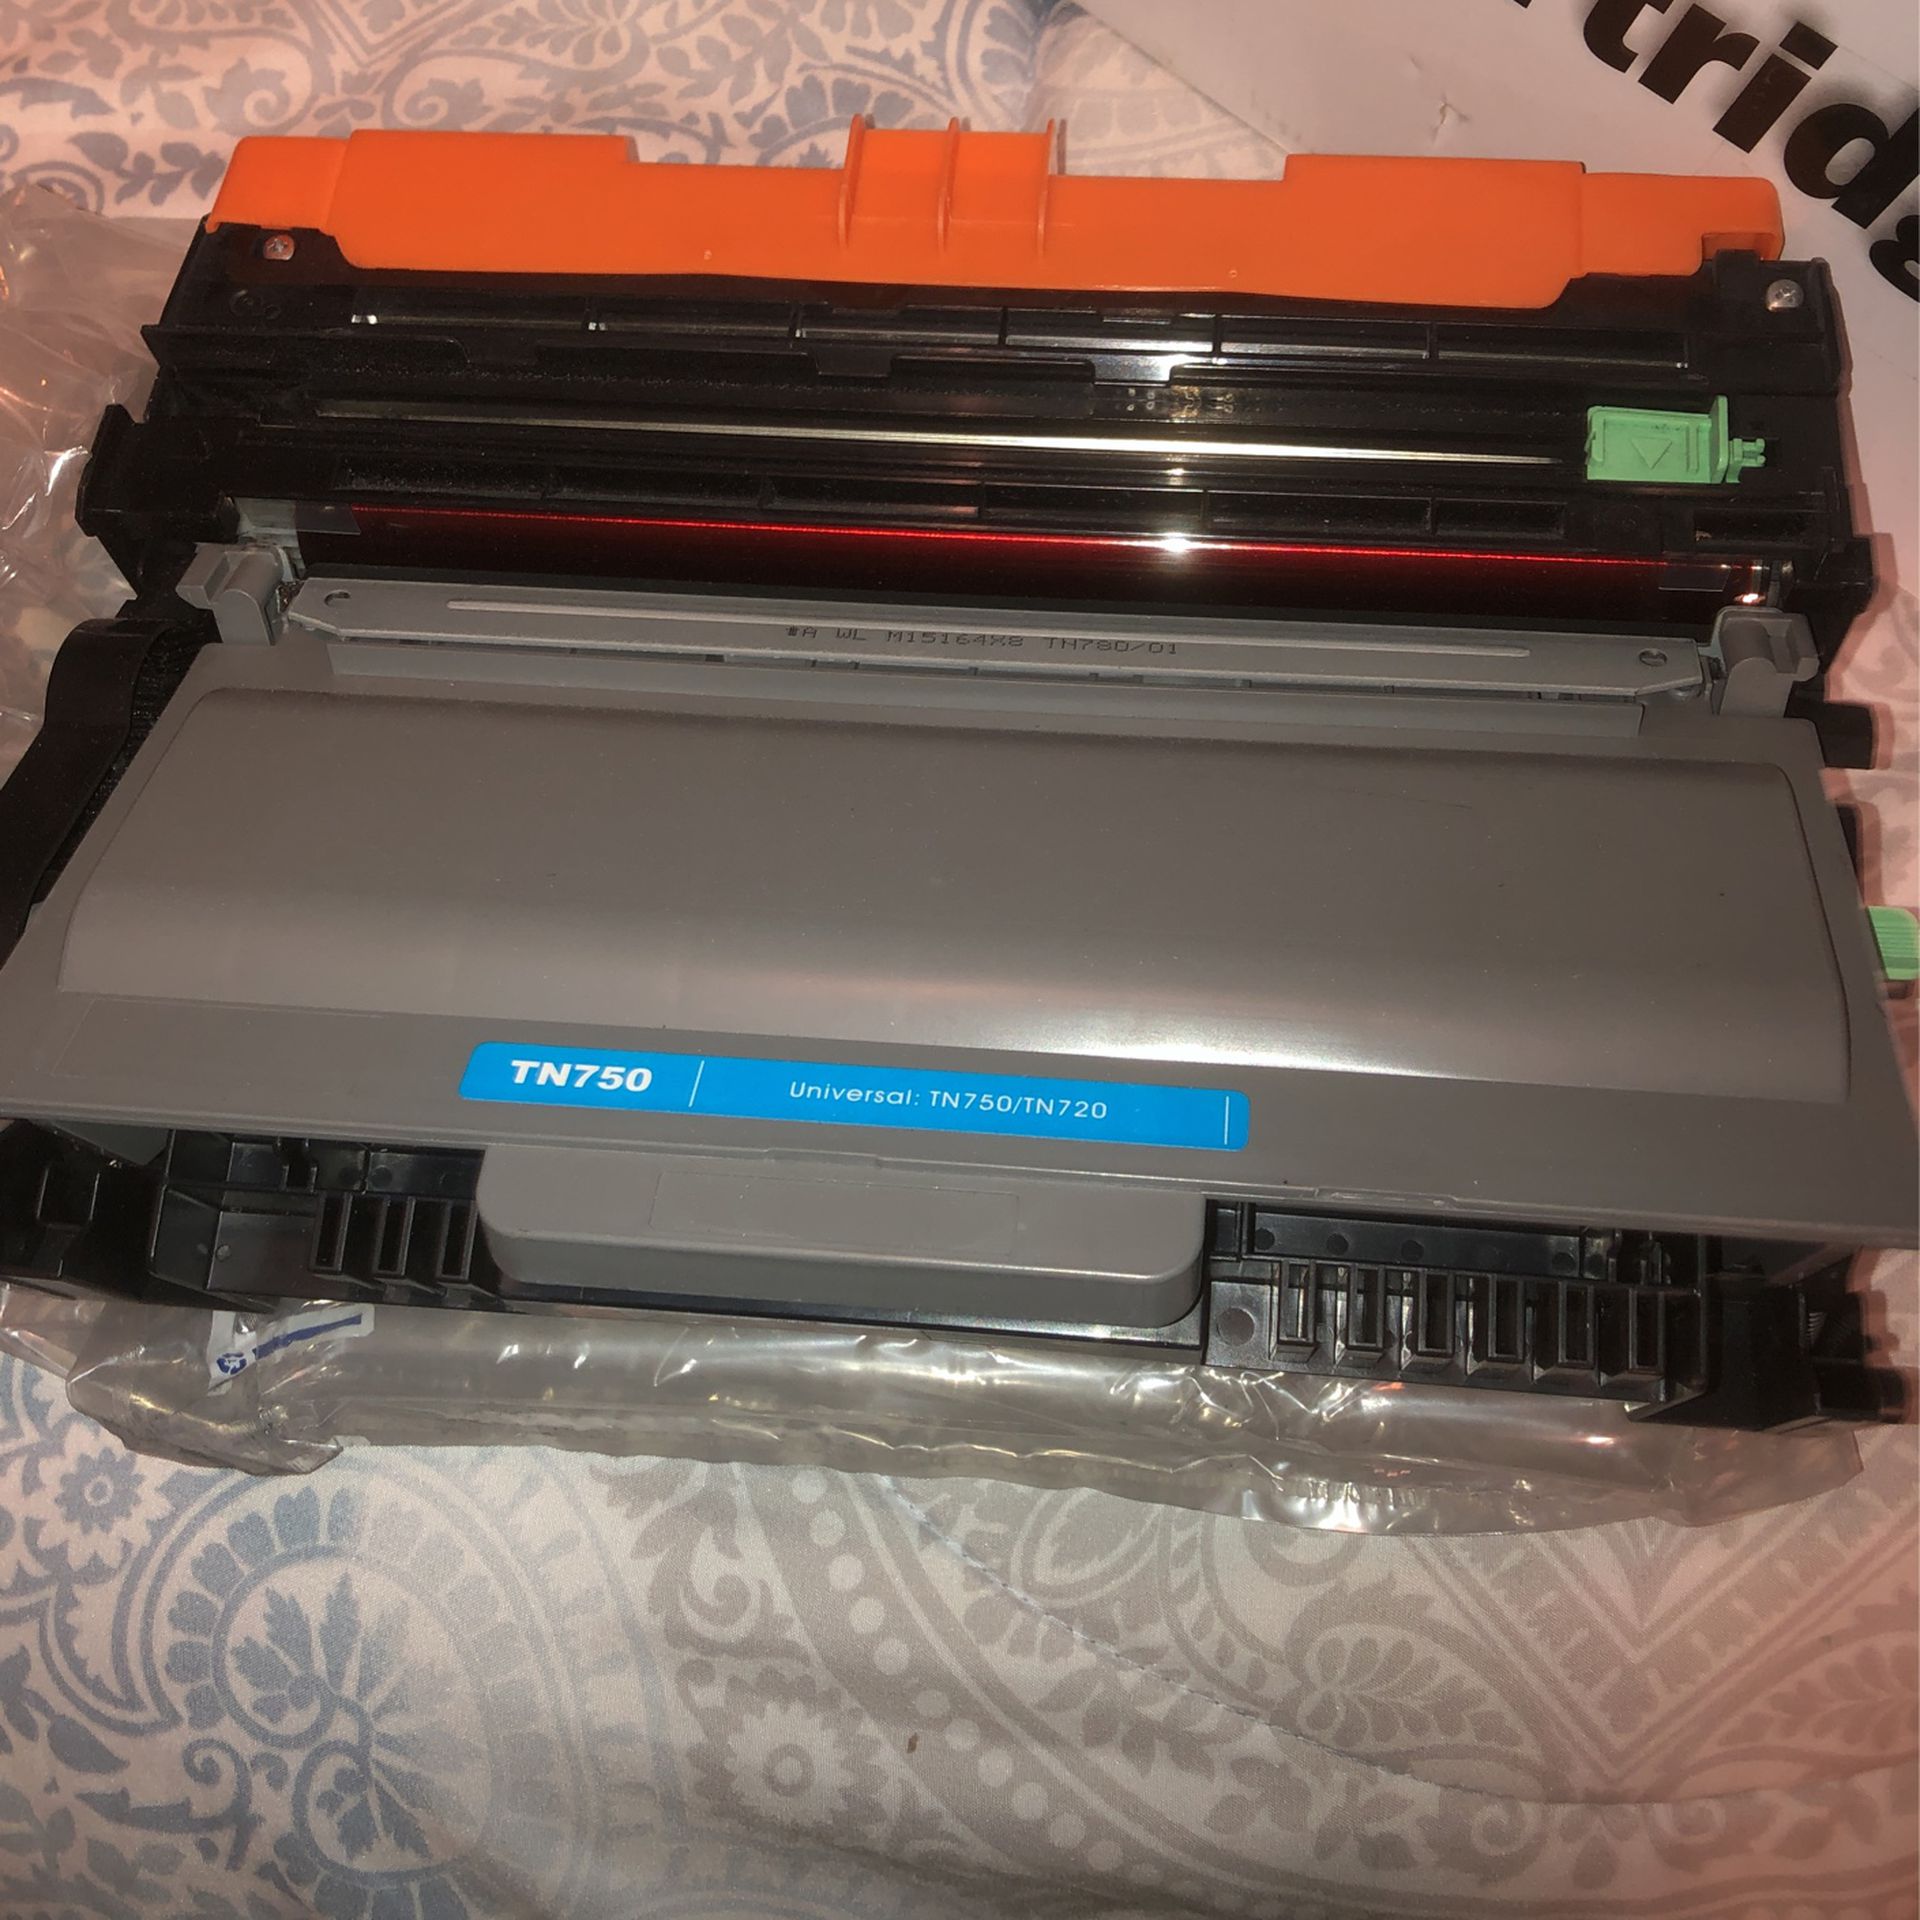   New TN 750 toner cartridge for brother MFC – 8510DN